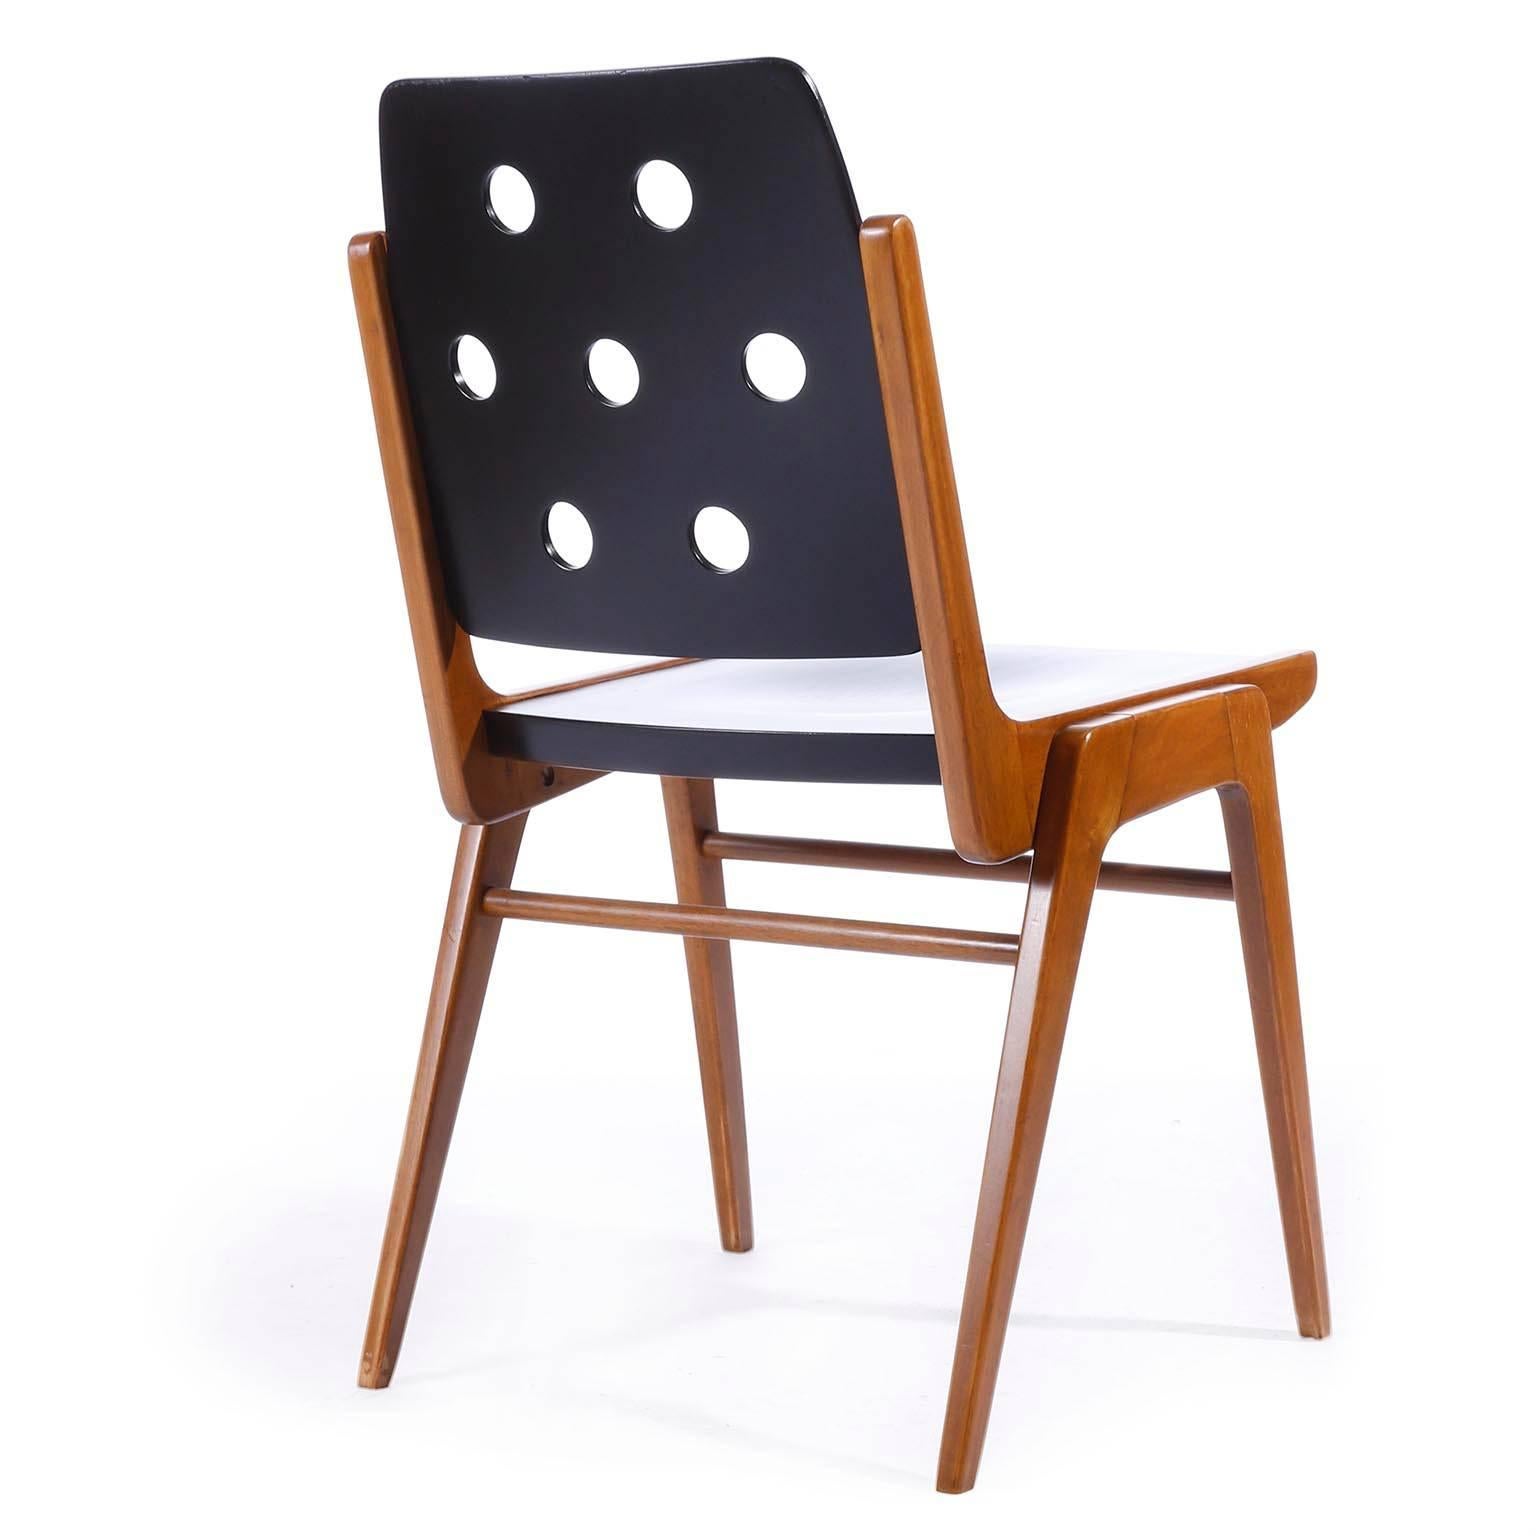 Austrian One of 12 Stacking Chairs Franz Schuster, Bicolored Beech Black, Austria, 1959